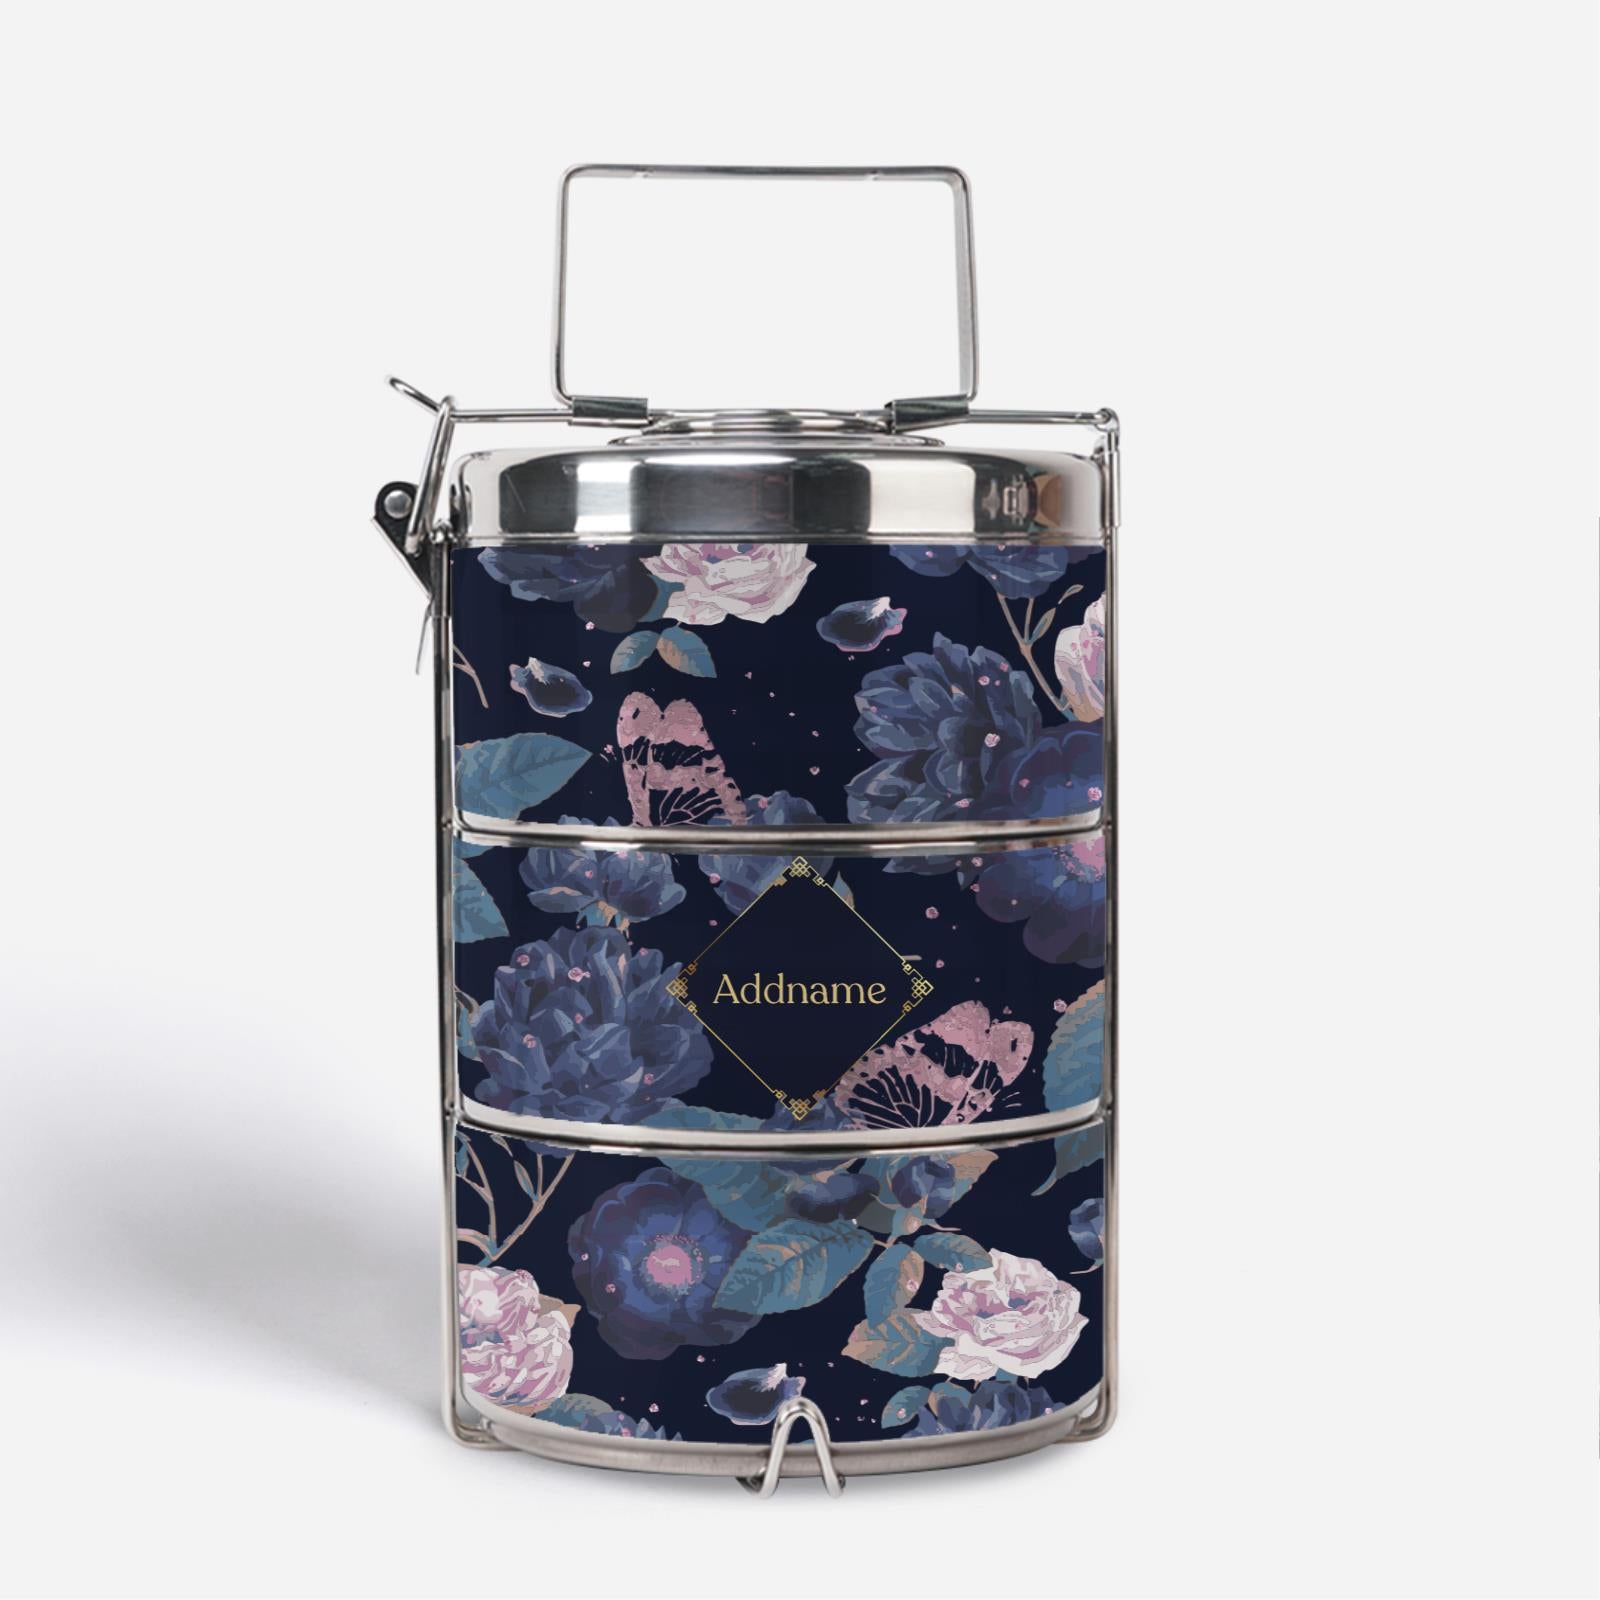 Royal Floral Series With English Personalization Premium Tiffin Carrier - Serene Moonlight